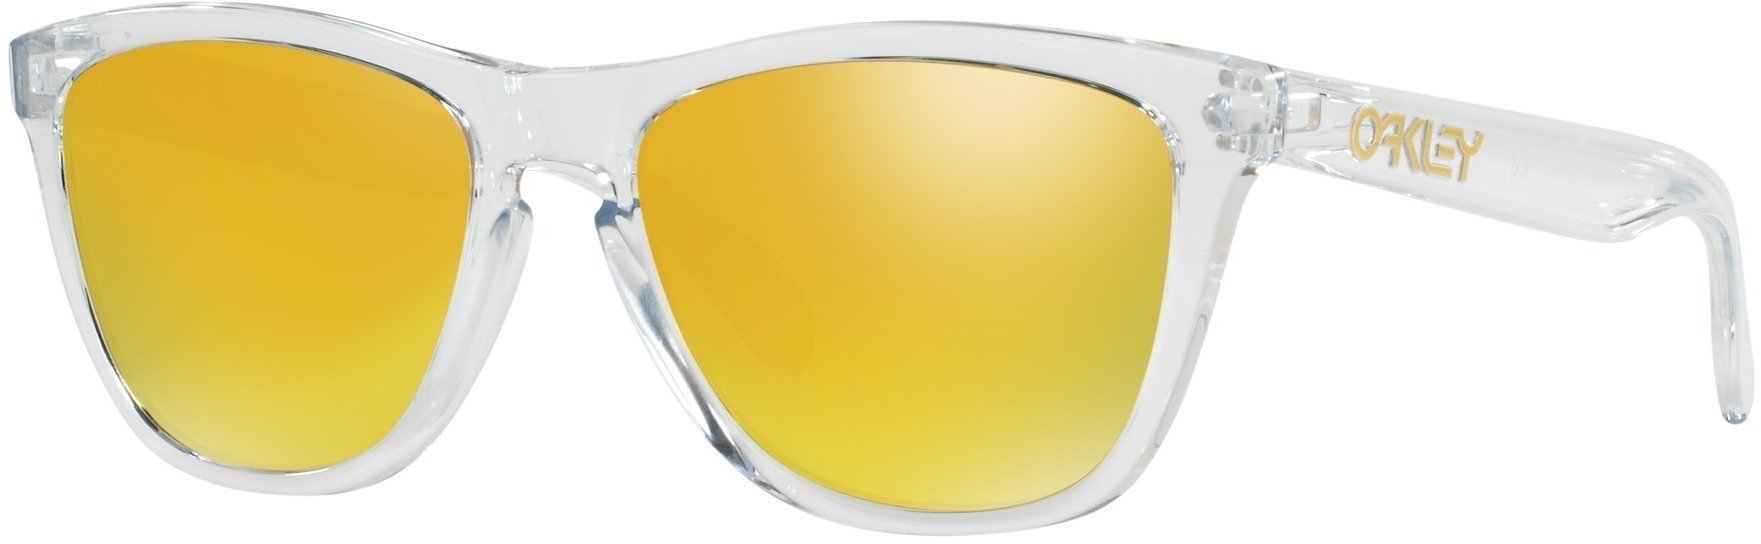 Sportbril Oakley Frogskins Crystal Collection 24k Iridium Polished Clear